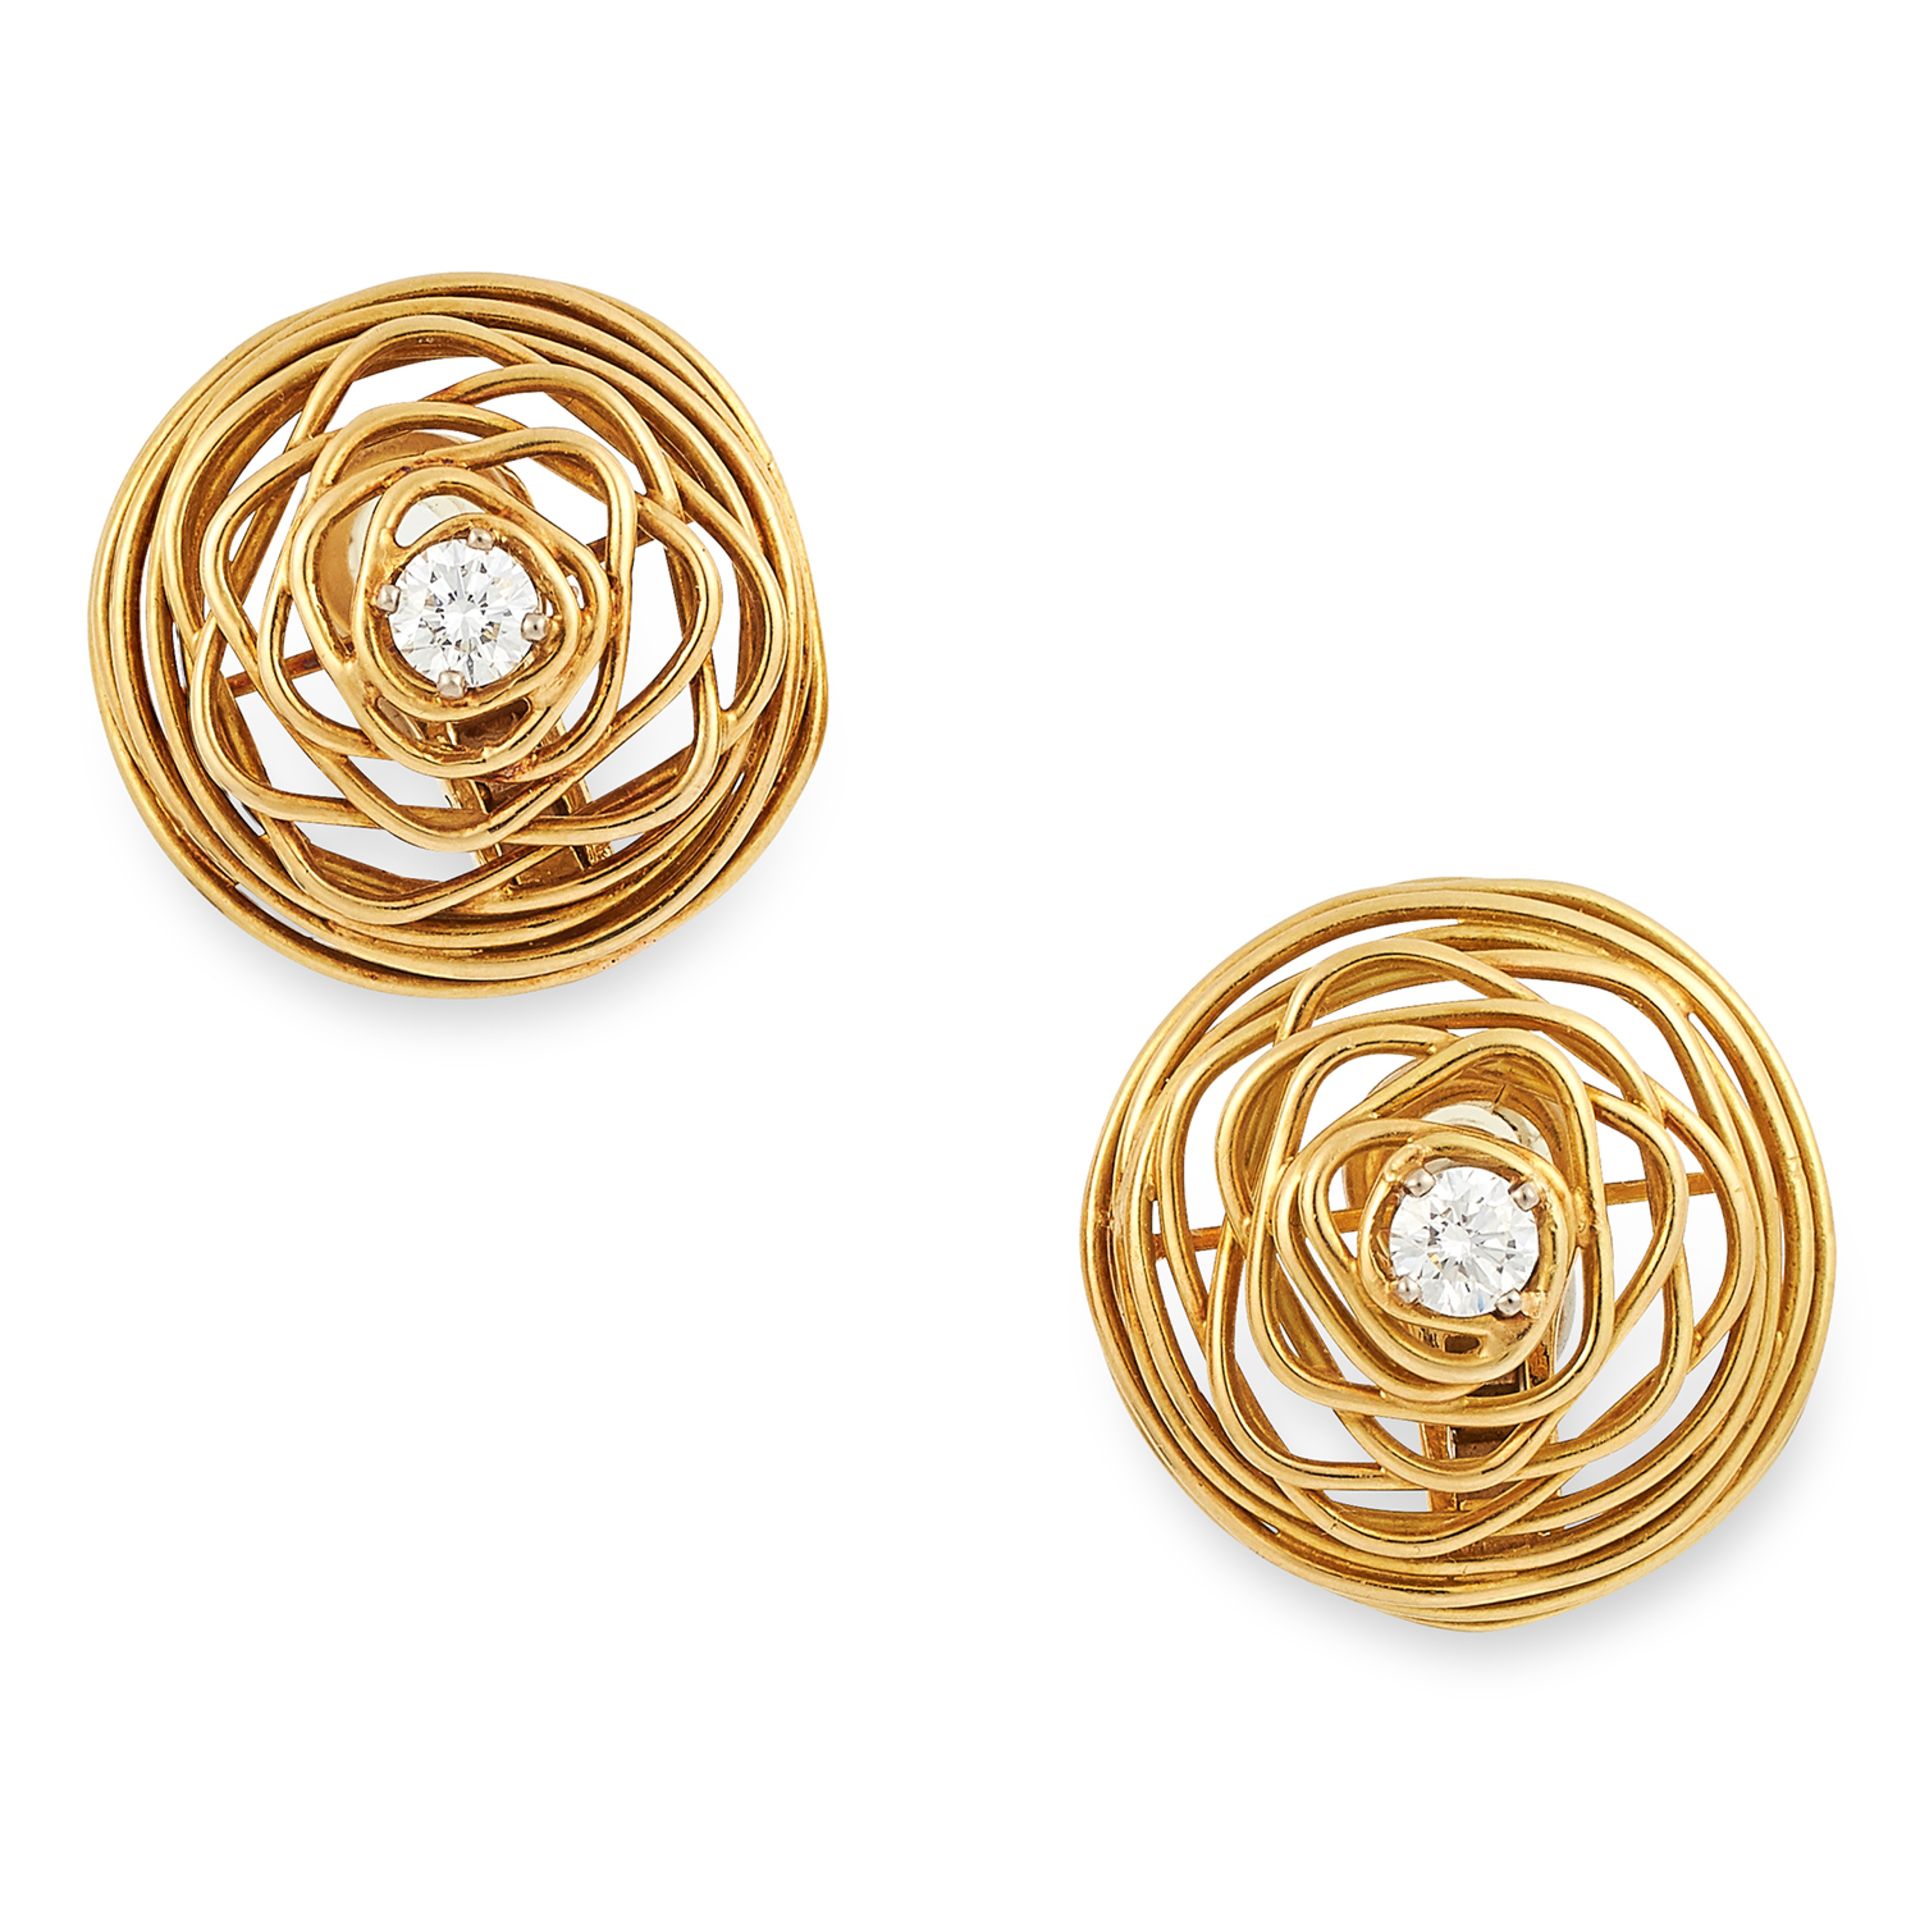 A DIAMOND CLIP EARRINGS, ANDREW GRIMA, CIRCA 1970 each of open wirework design set with a round